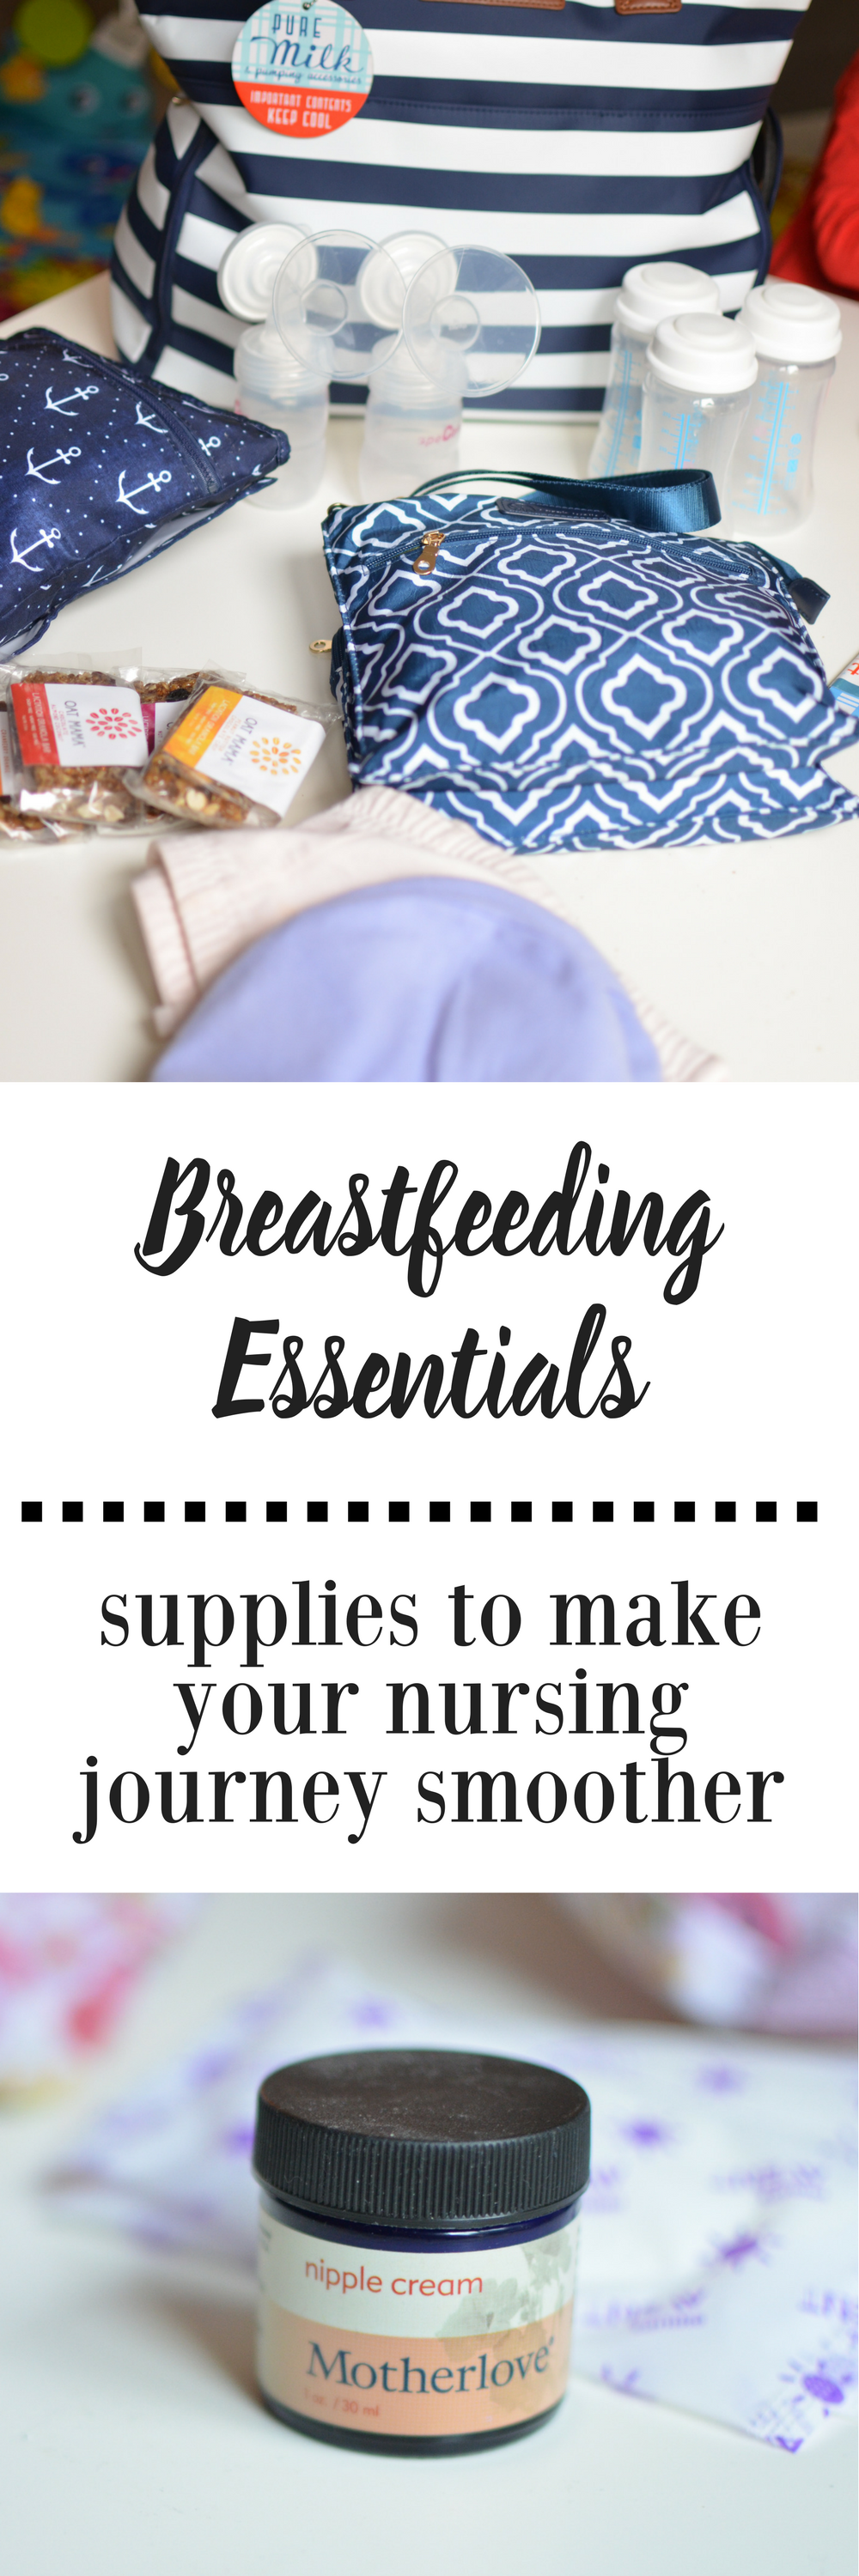 Planning to breastfeed? Here are the top breastfeeding supplies to help you on your nursing journey!